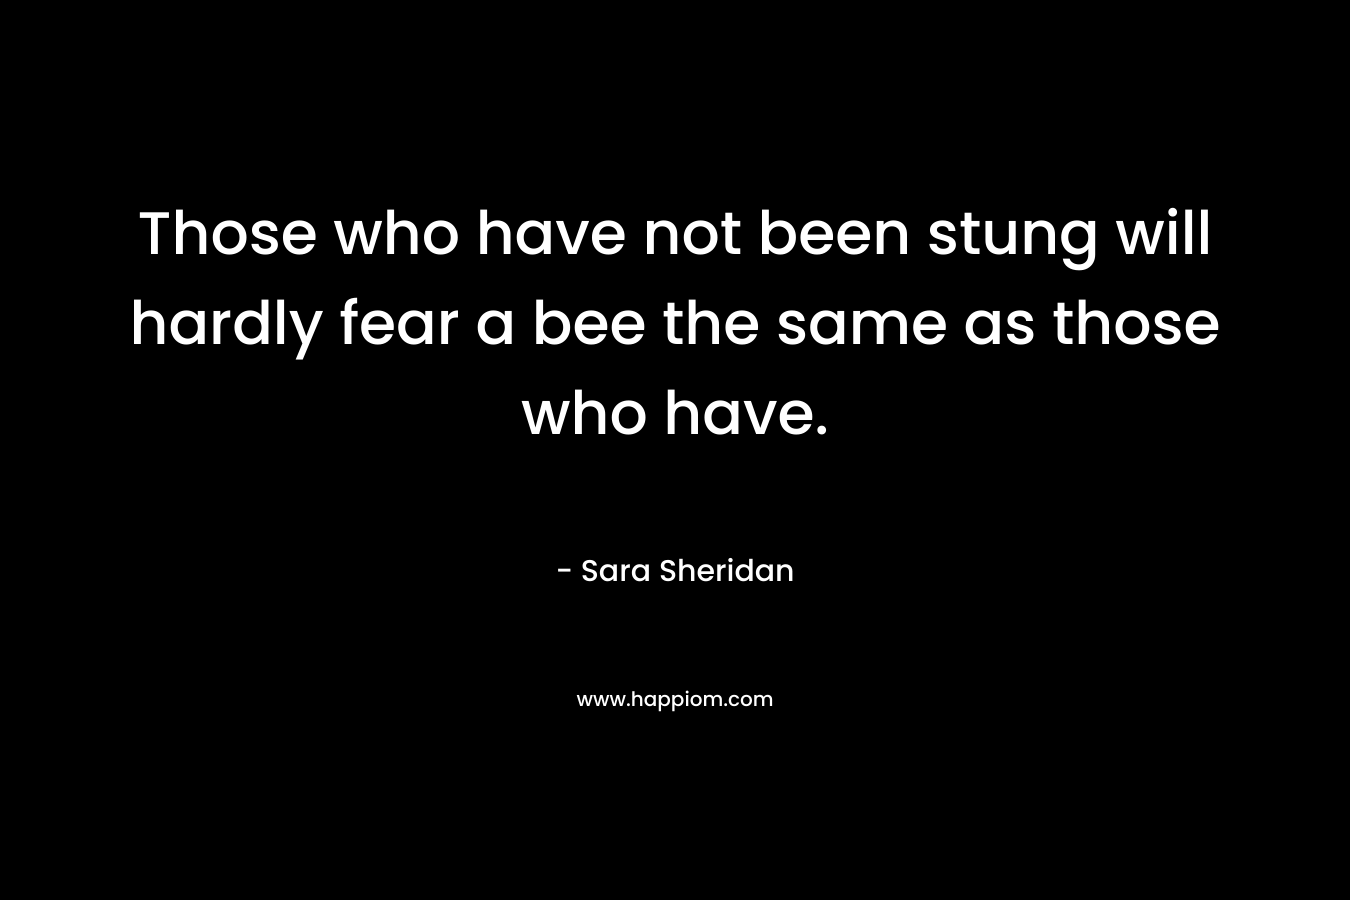 Those who have not been stung will hardly fear a bee the same as those who have. – Sara Sheridan